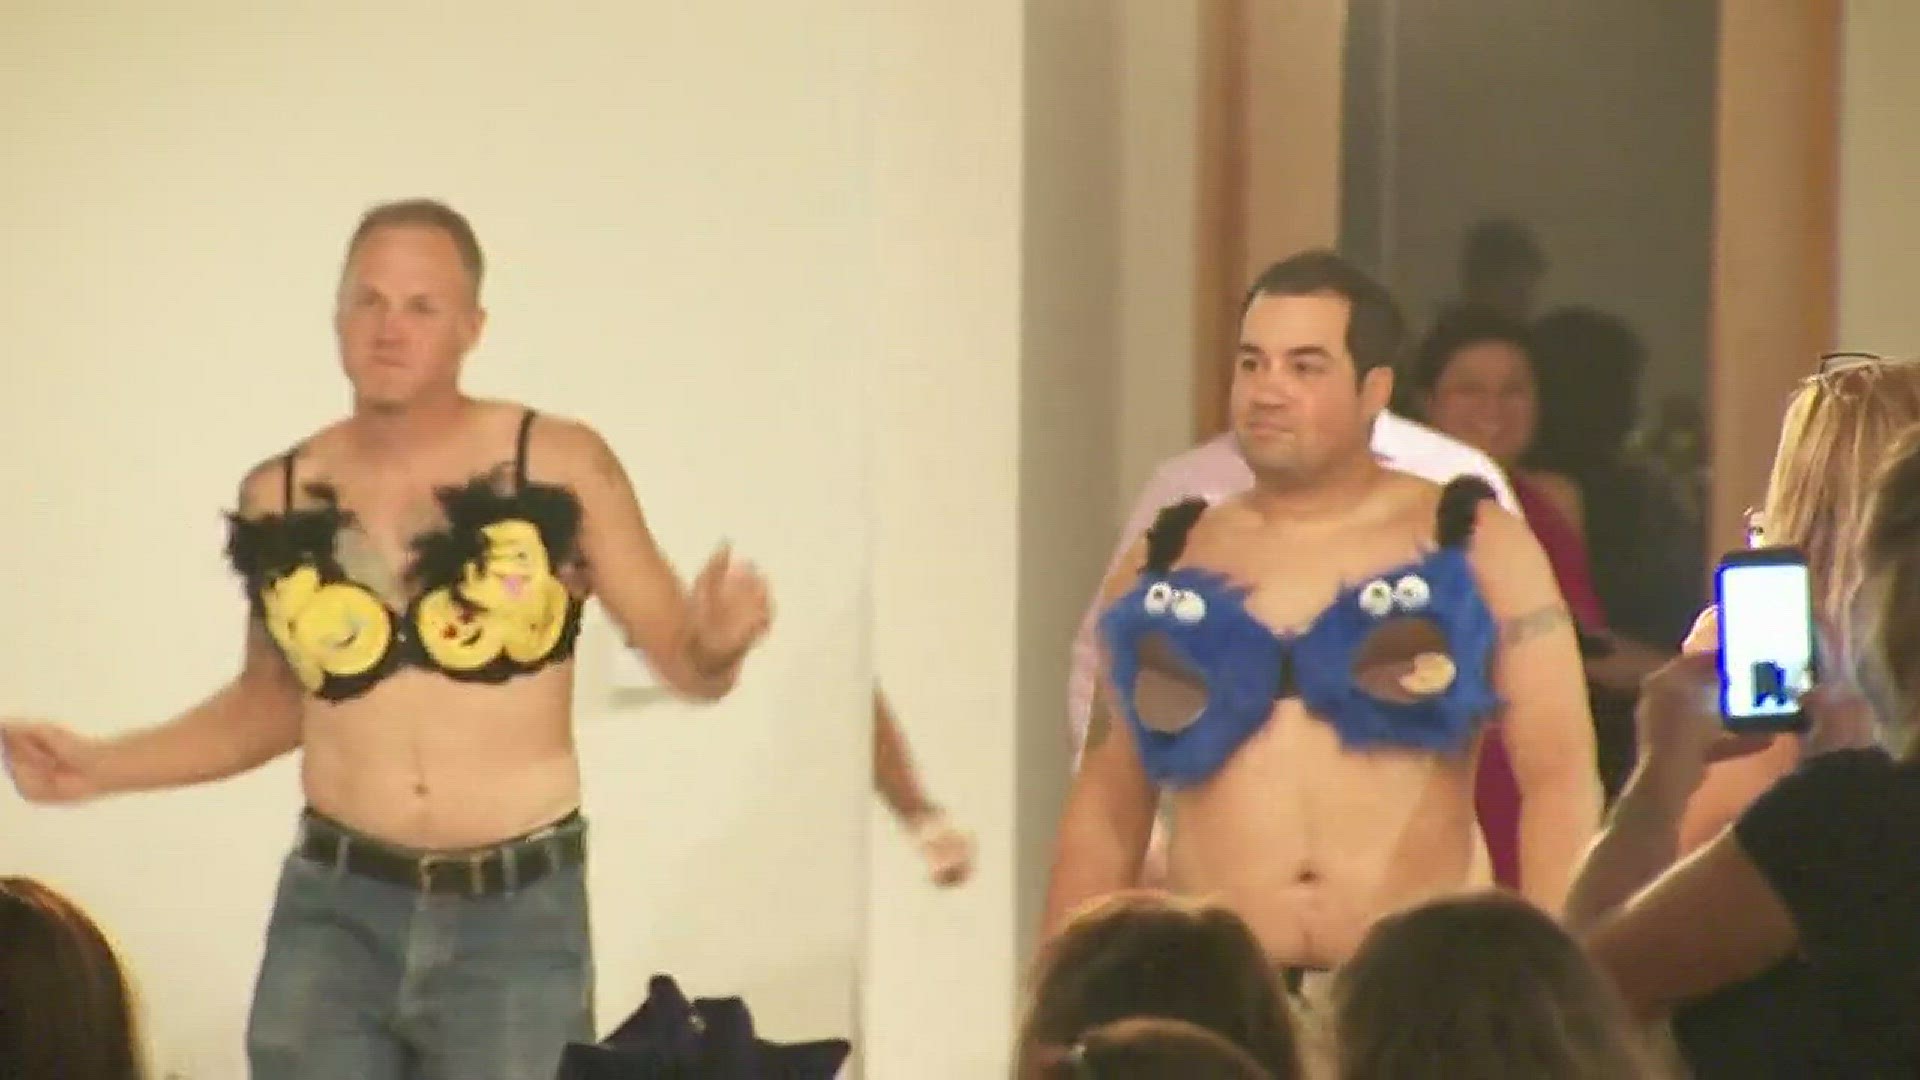 Men to sport bras at Charlotte breast cancer awareness event